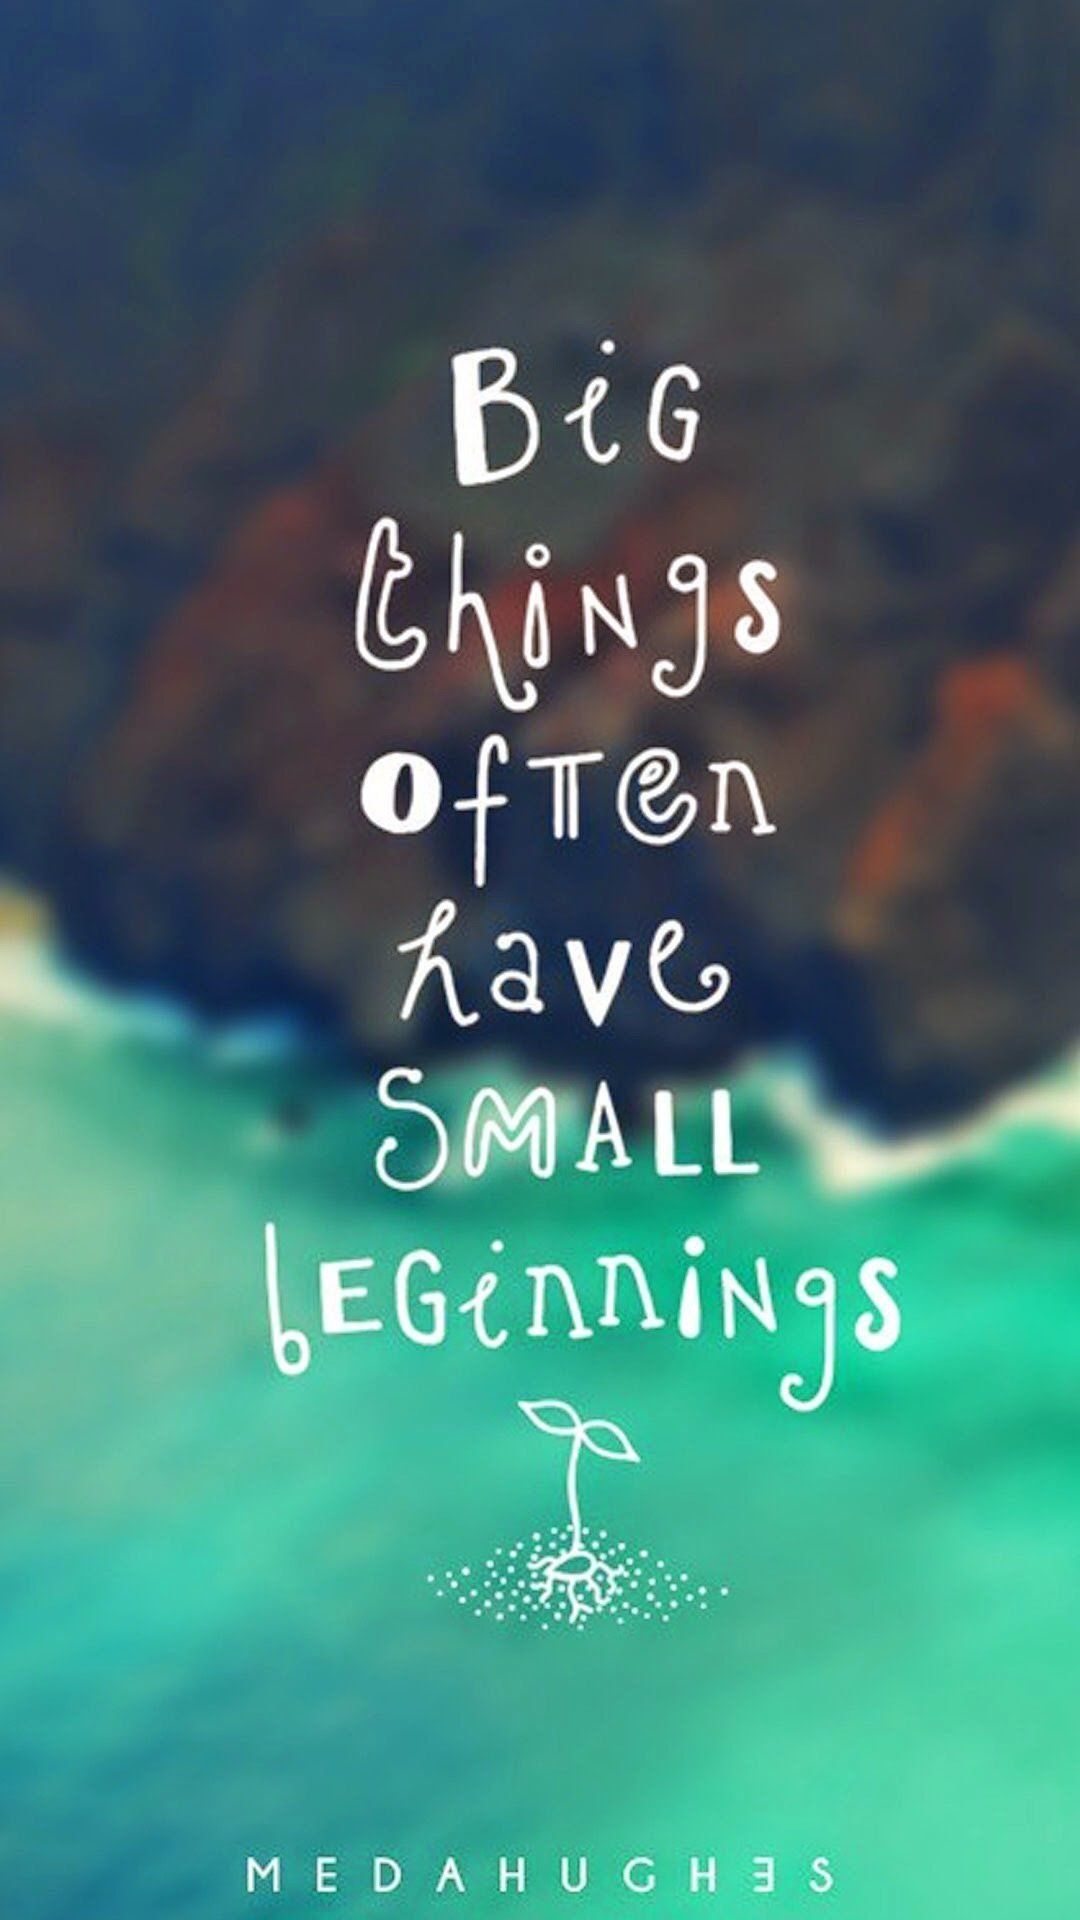 Mobile Encouraging Quotes Wallpaper